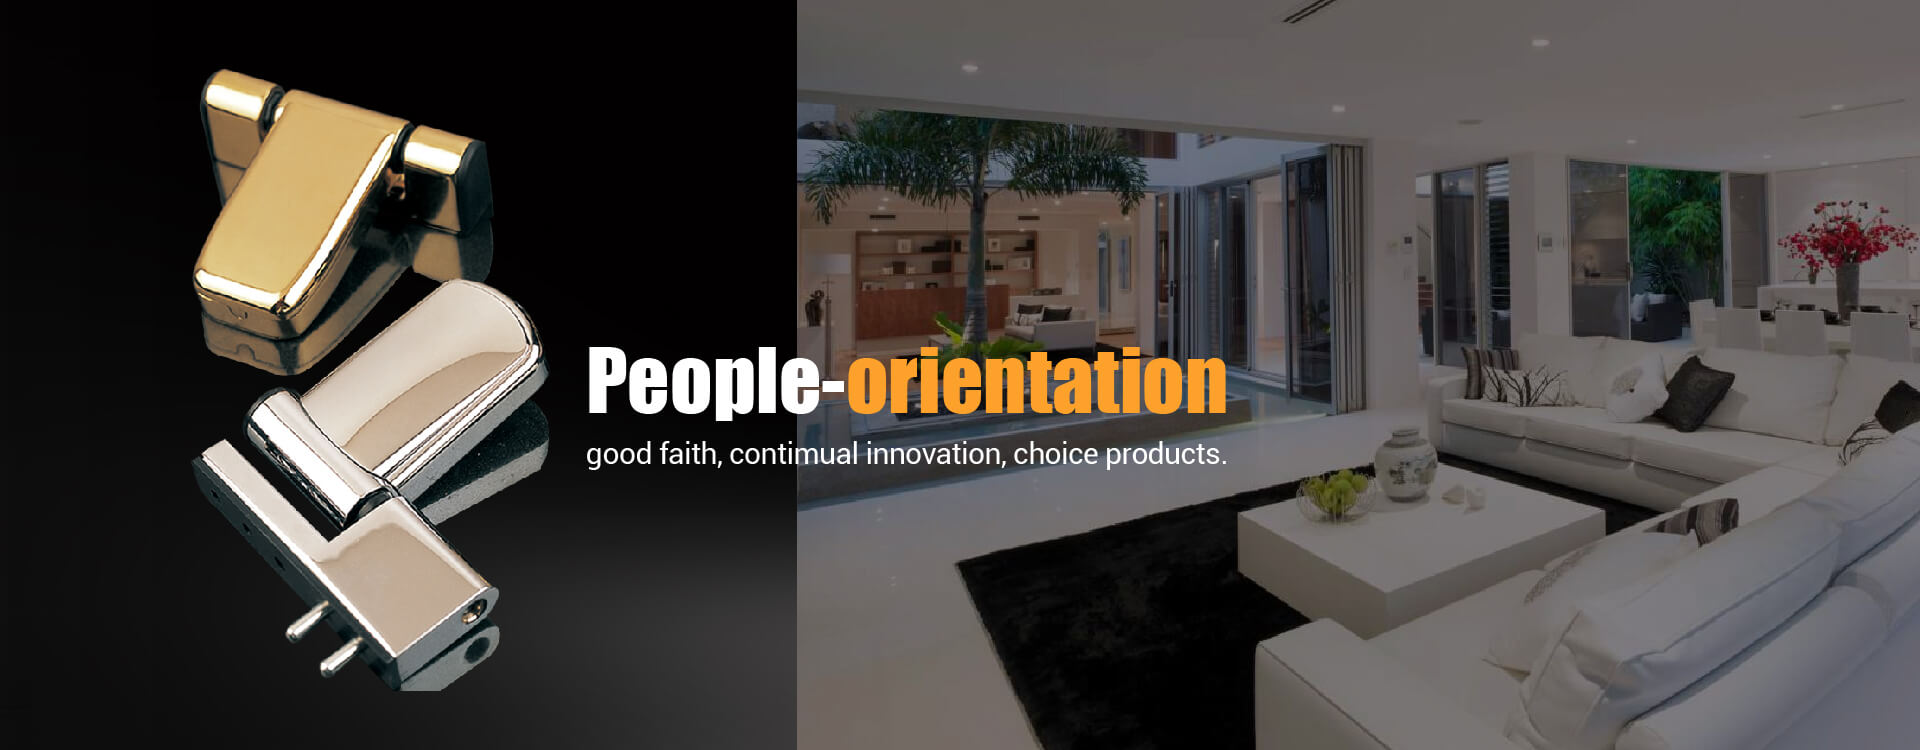 People-orientation,good faith, contimual innovation,choice products